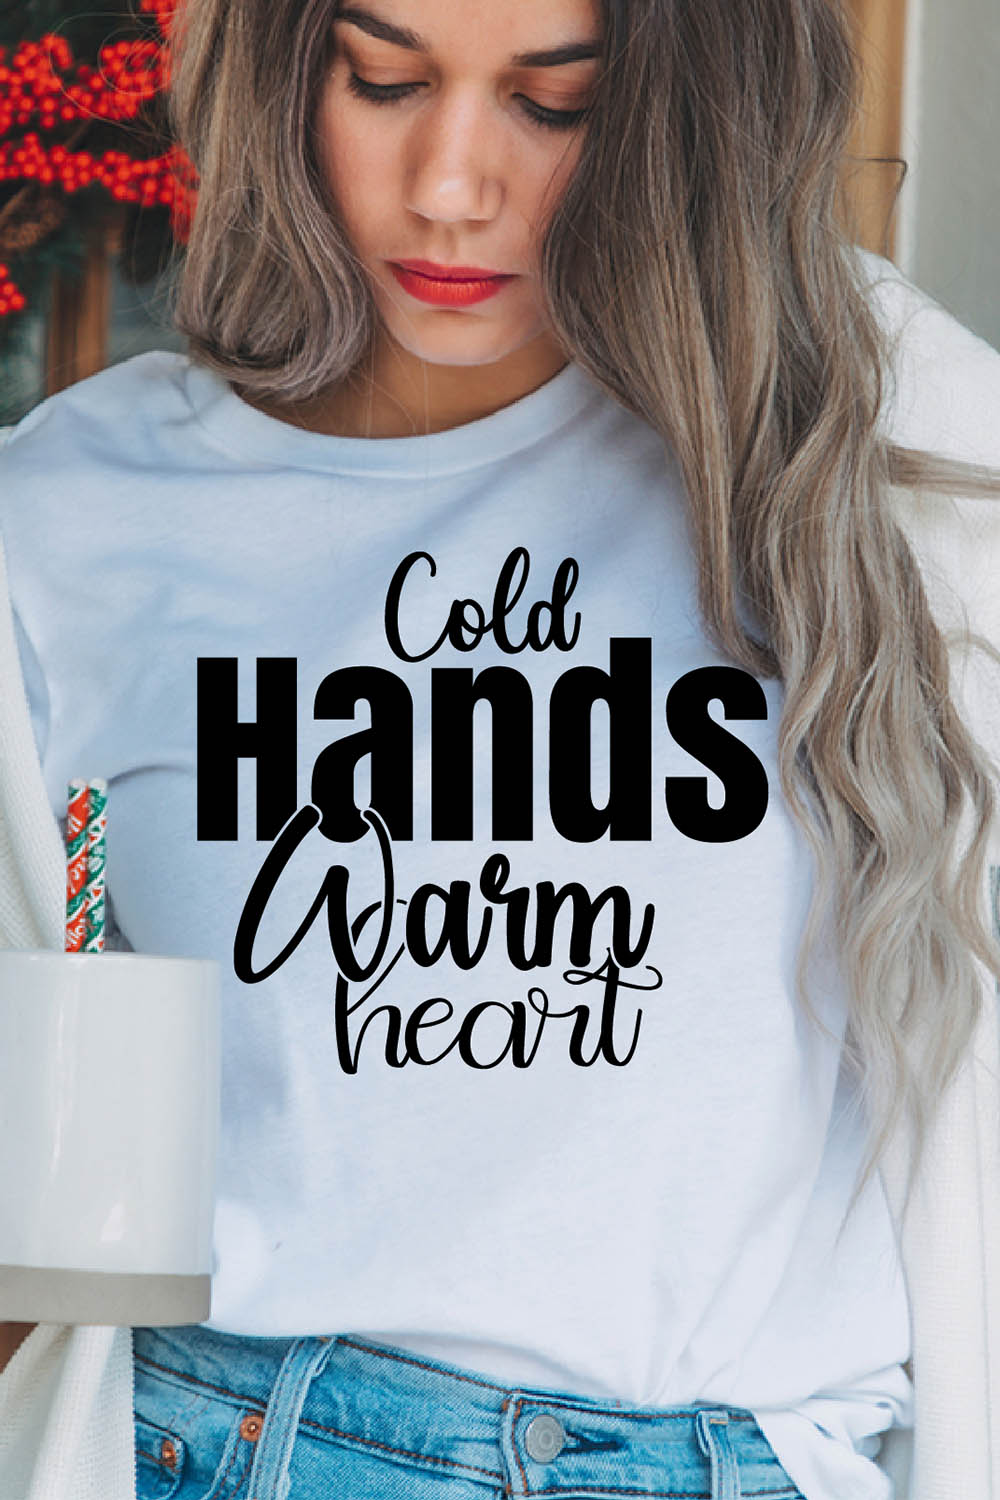 Image of a girl in a white T-shirt with an irresistible black inscription "Cold Hands Warm Heart".